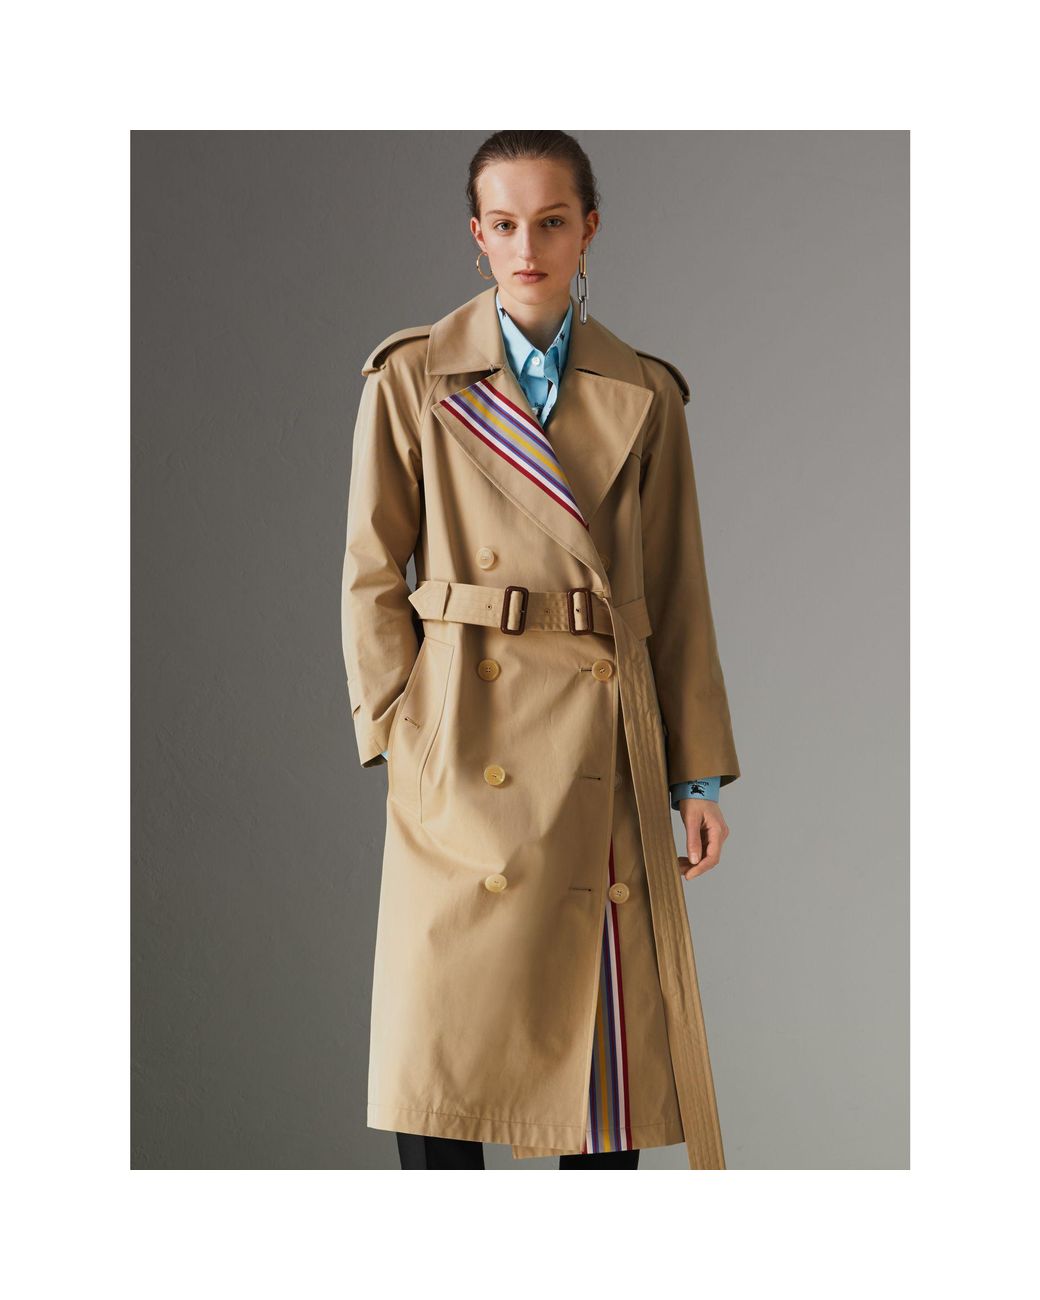 Apc Striped Dress and Burberry Trench